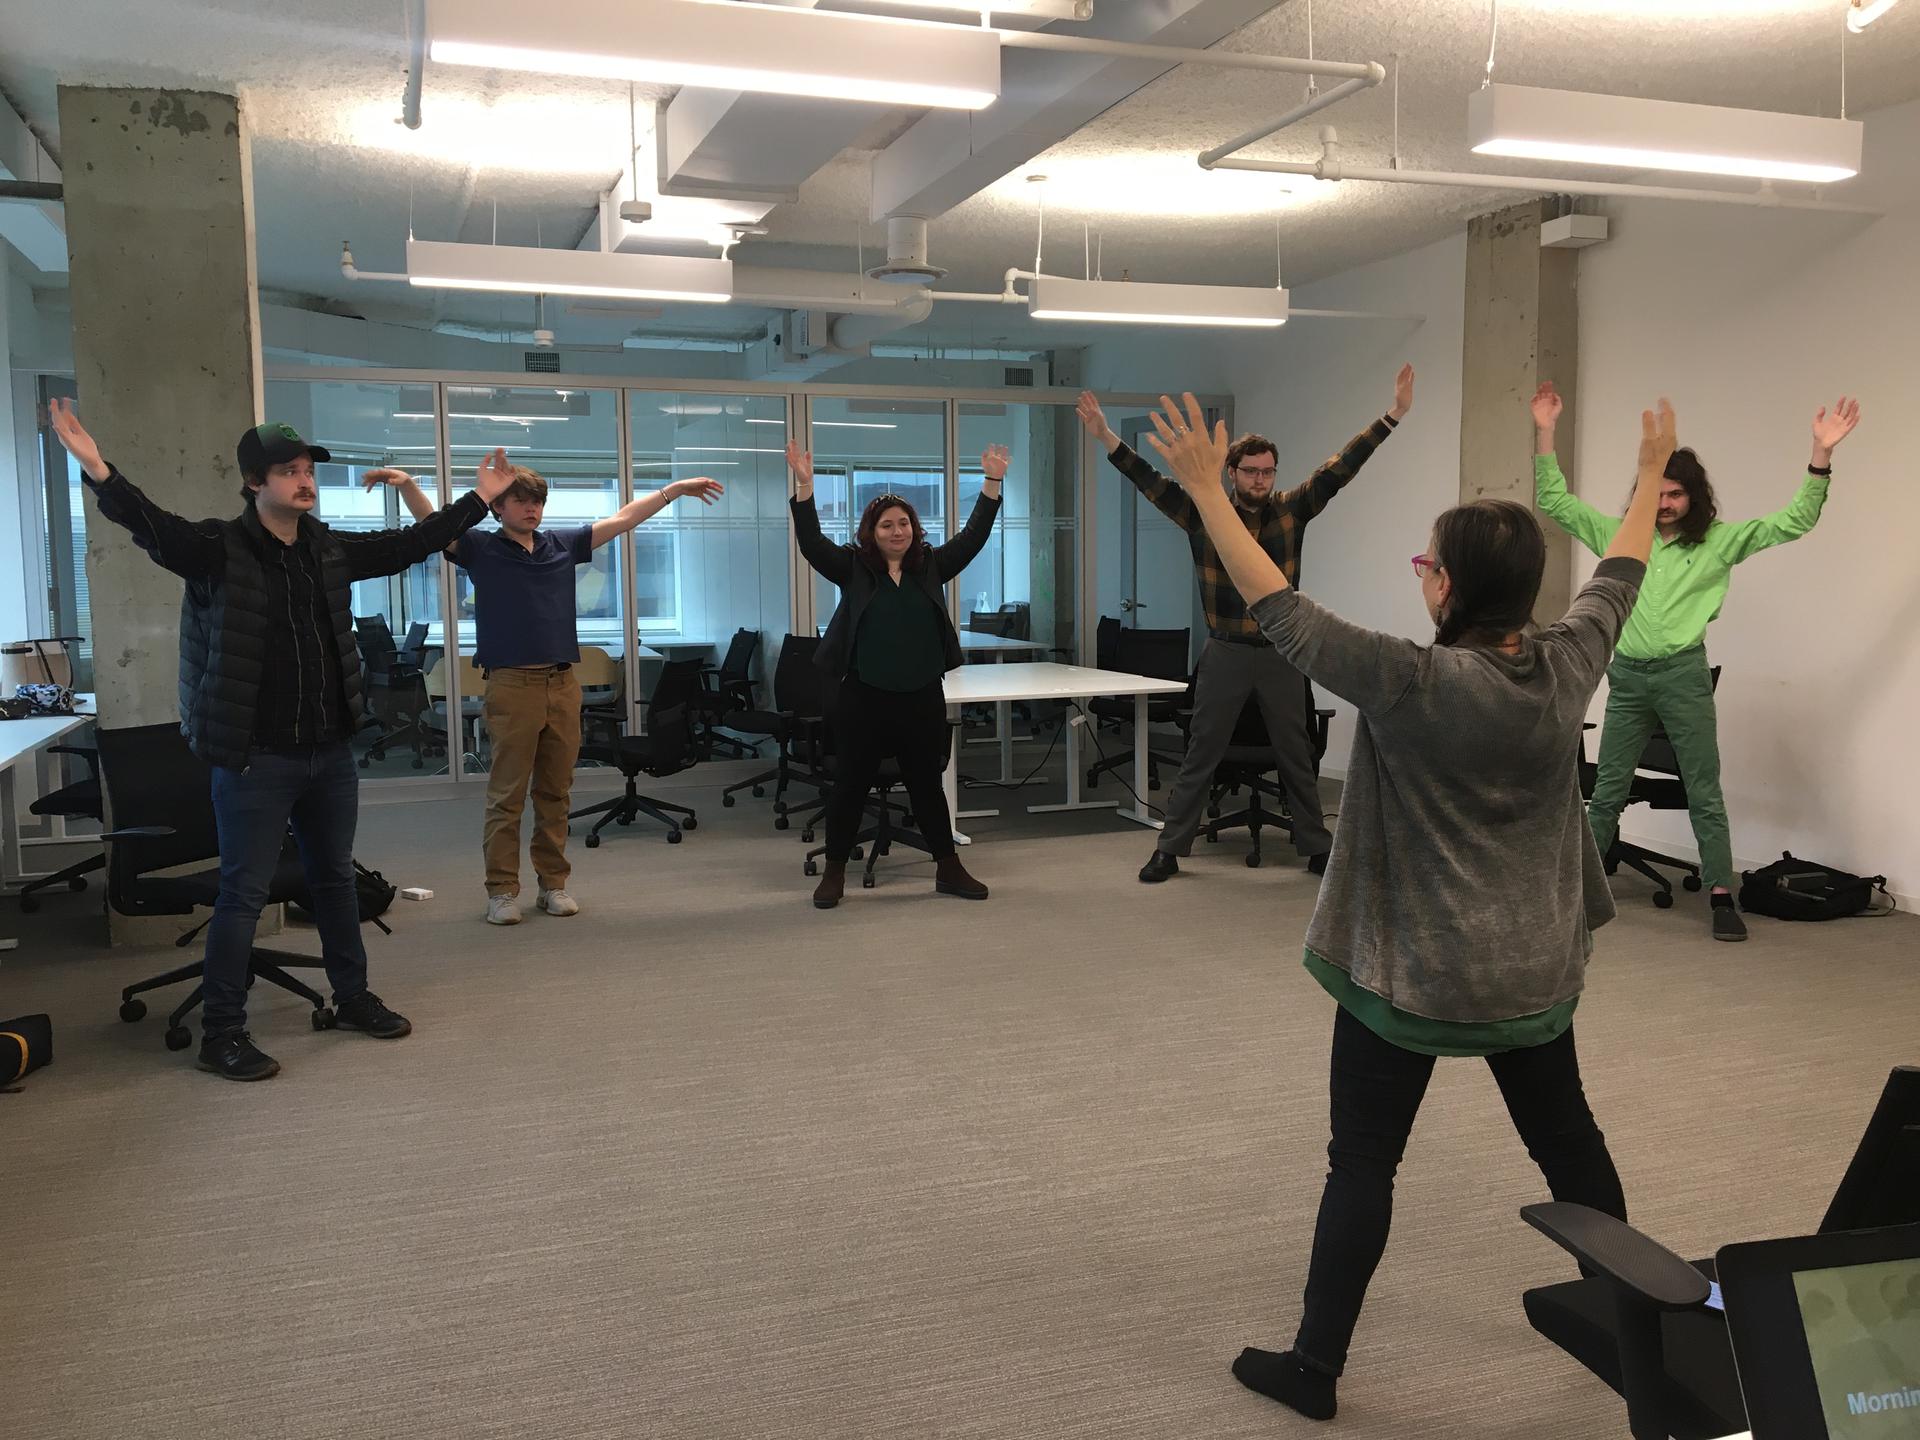 Image shows our five interns and yoga instructor practicing yoga with their hands and legs spread out.